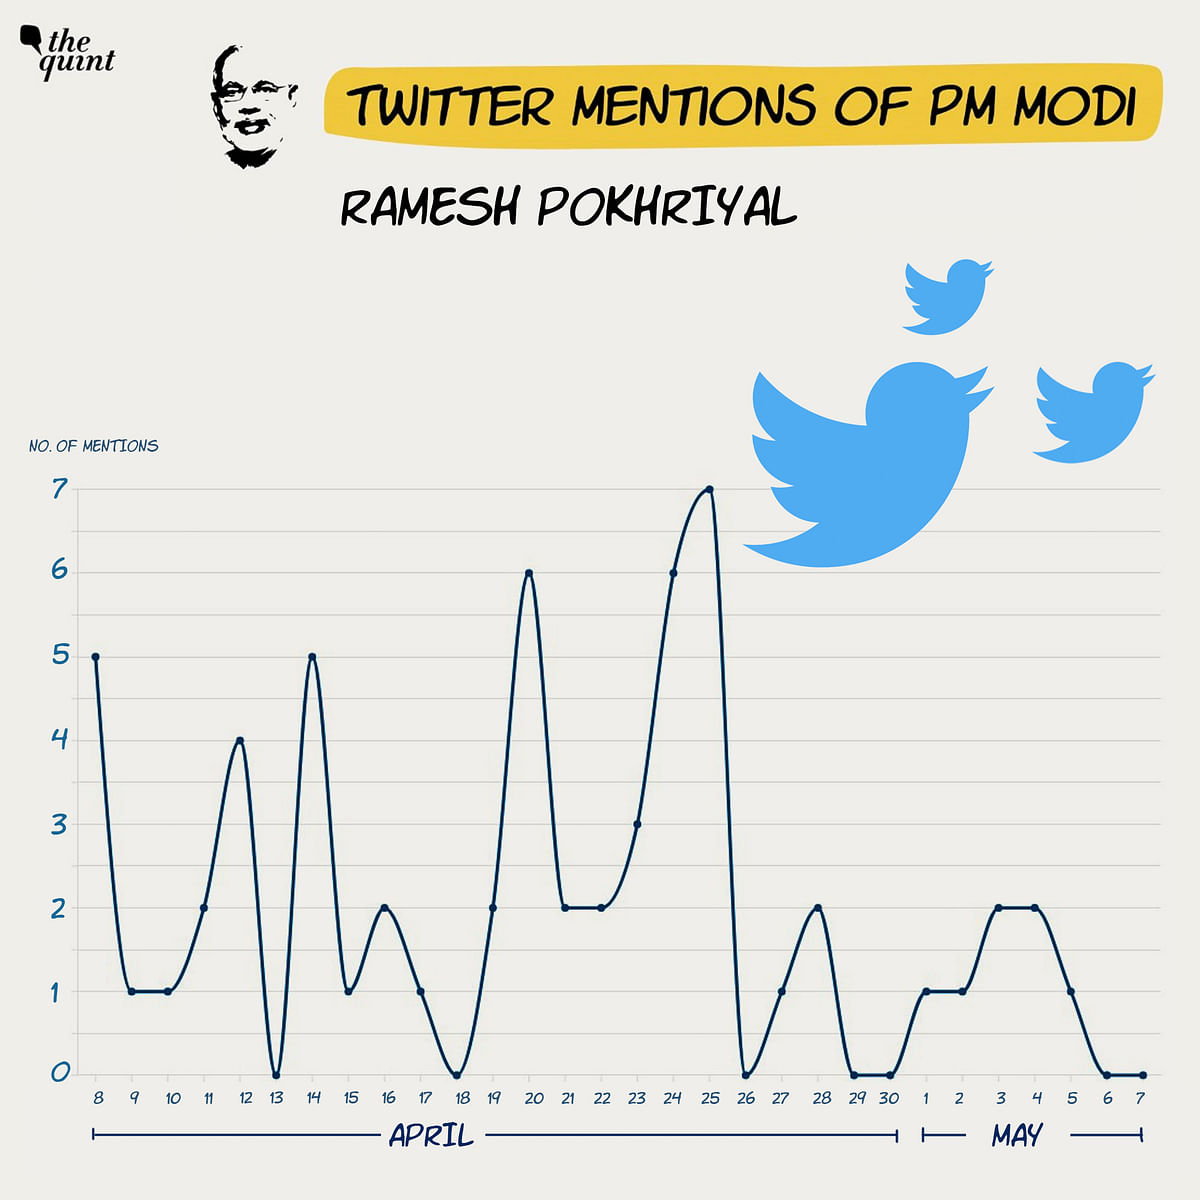 One of the conduits through which PM Modi remains present and visible in the minds of citizens is Twitter.